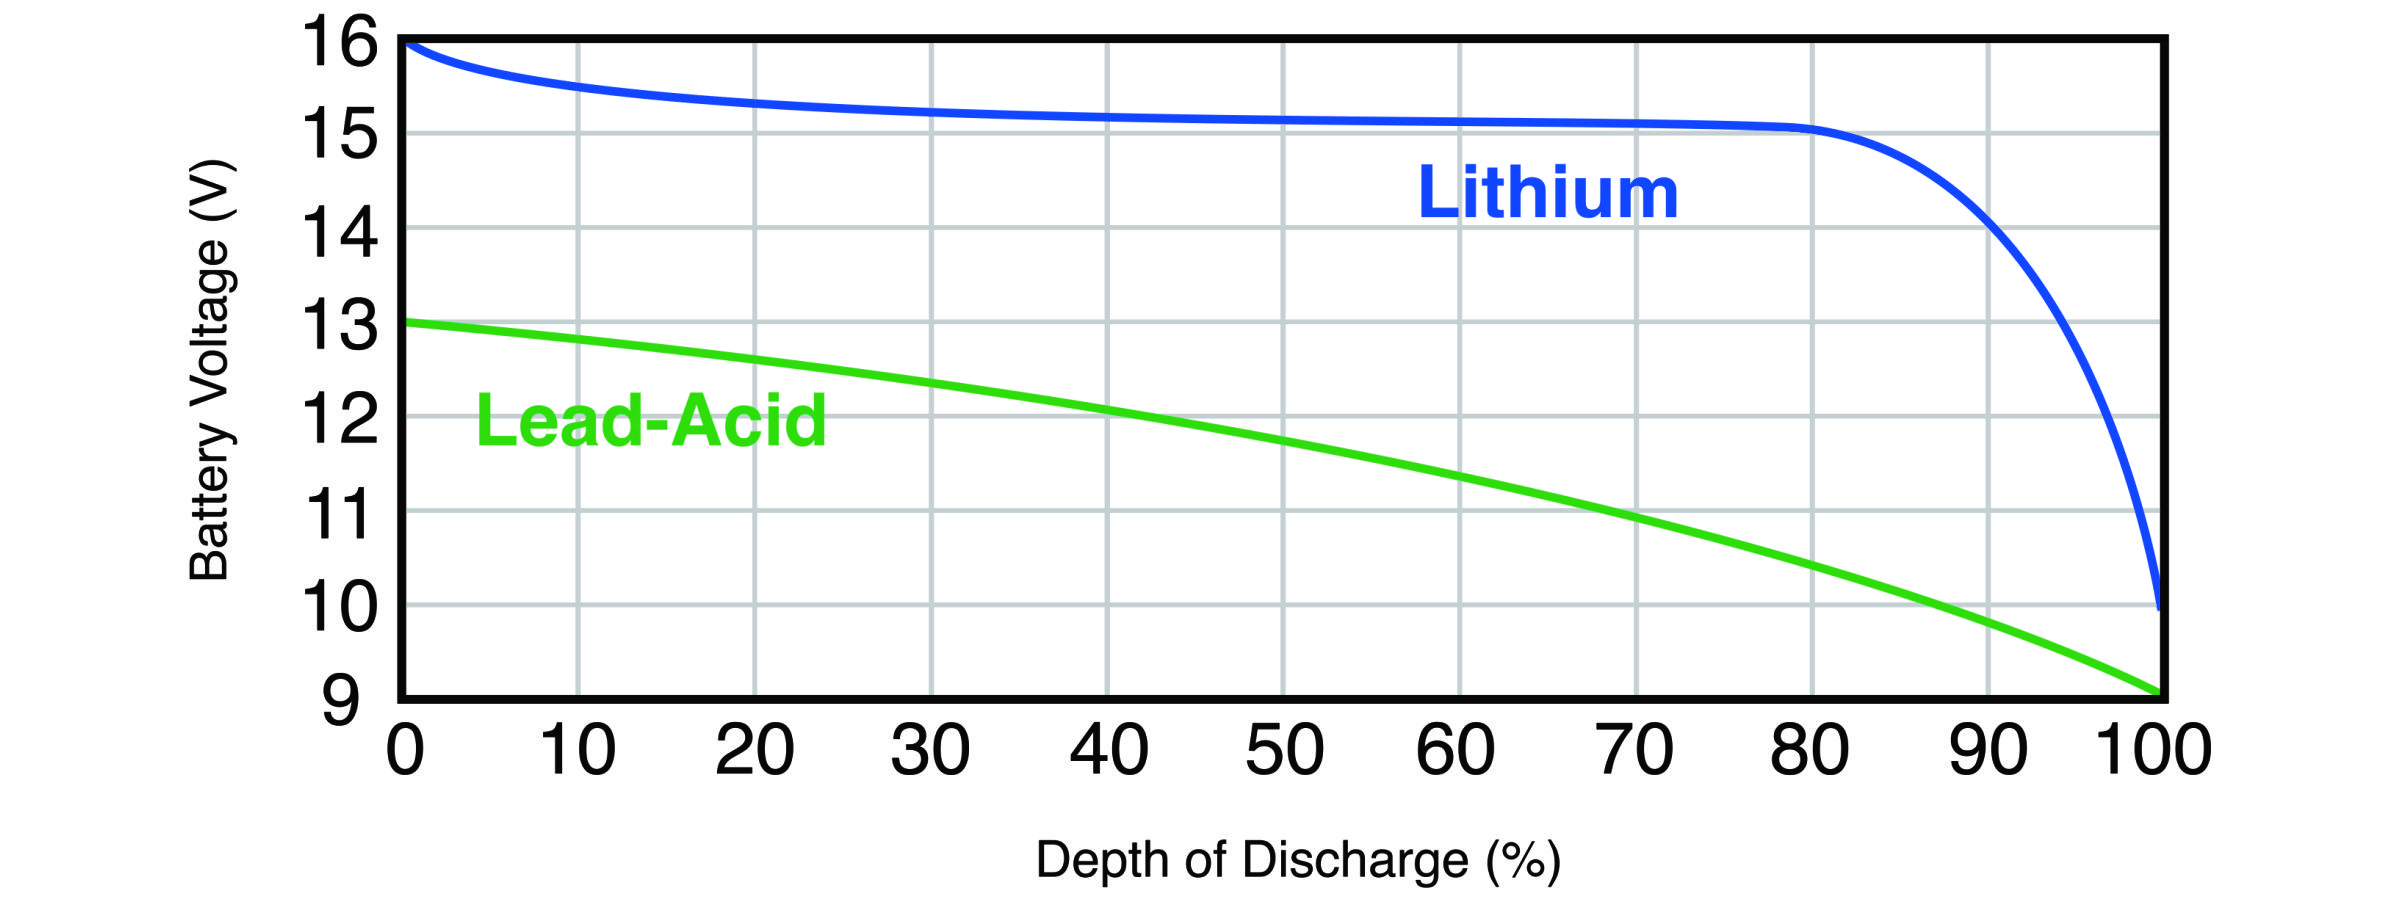 LED_Battery_Meters_With_Lithium_Batteries_-_Final.jpg